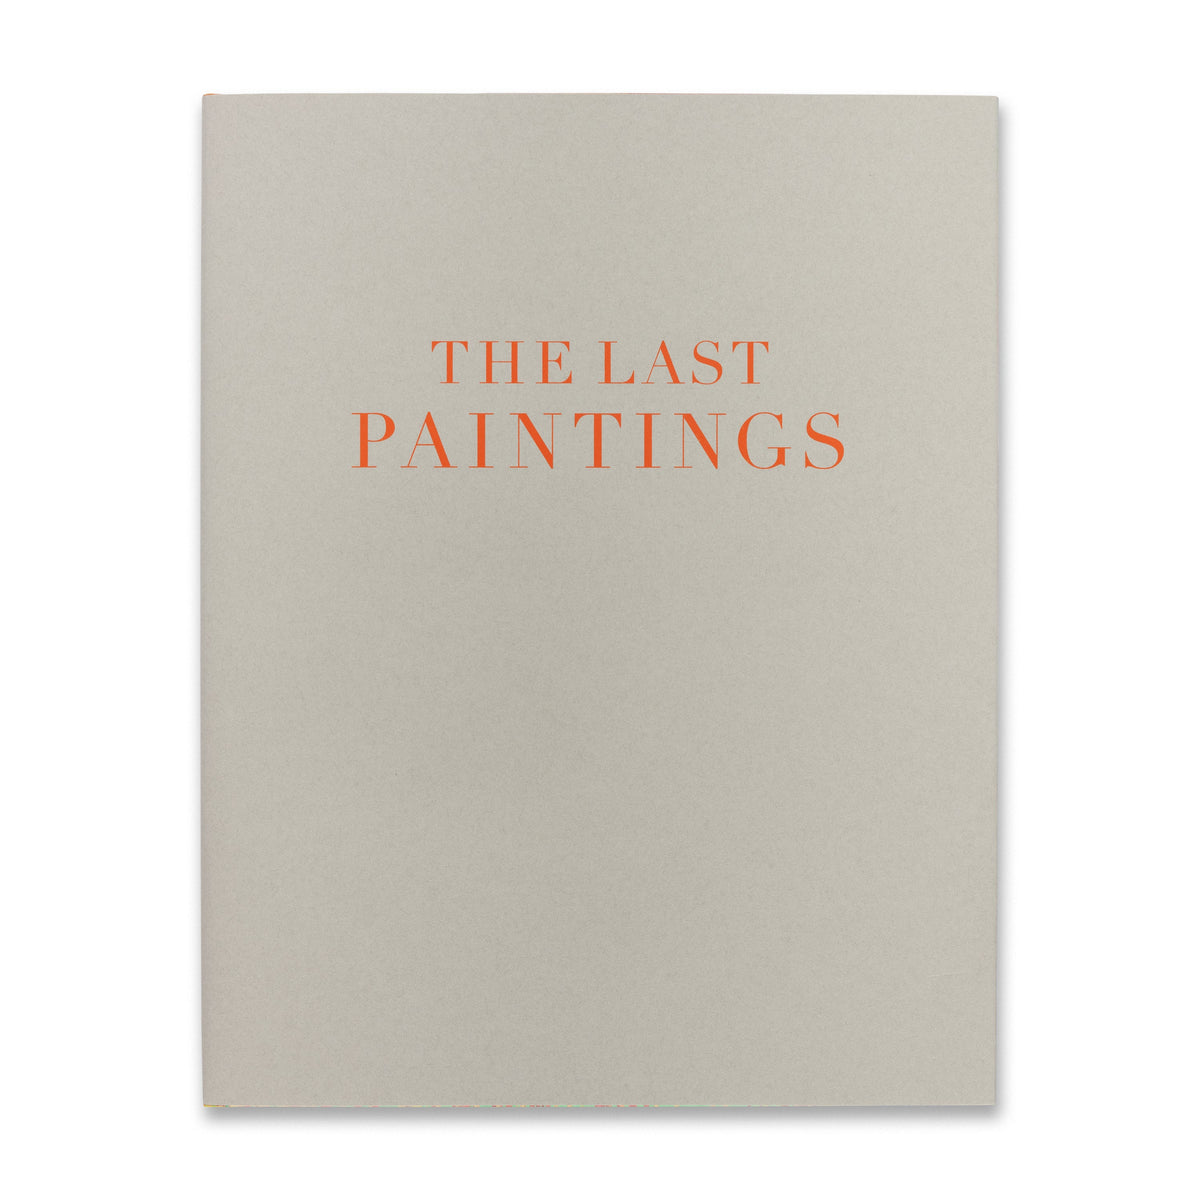 Cy Twombly: The Last Paintings in dust jacket